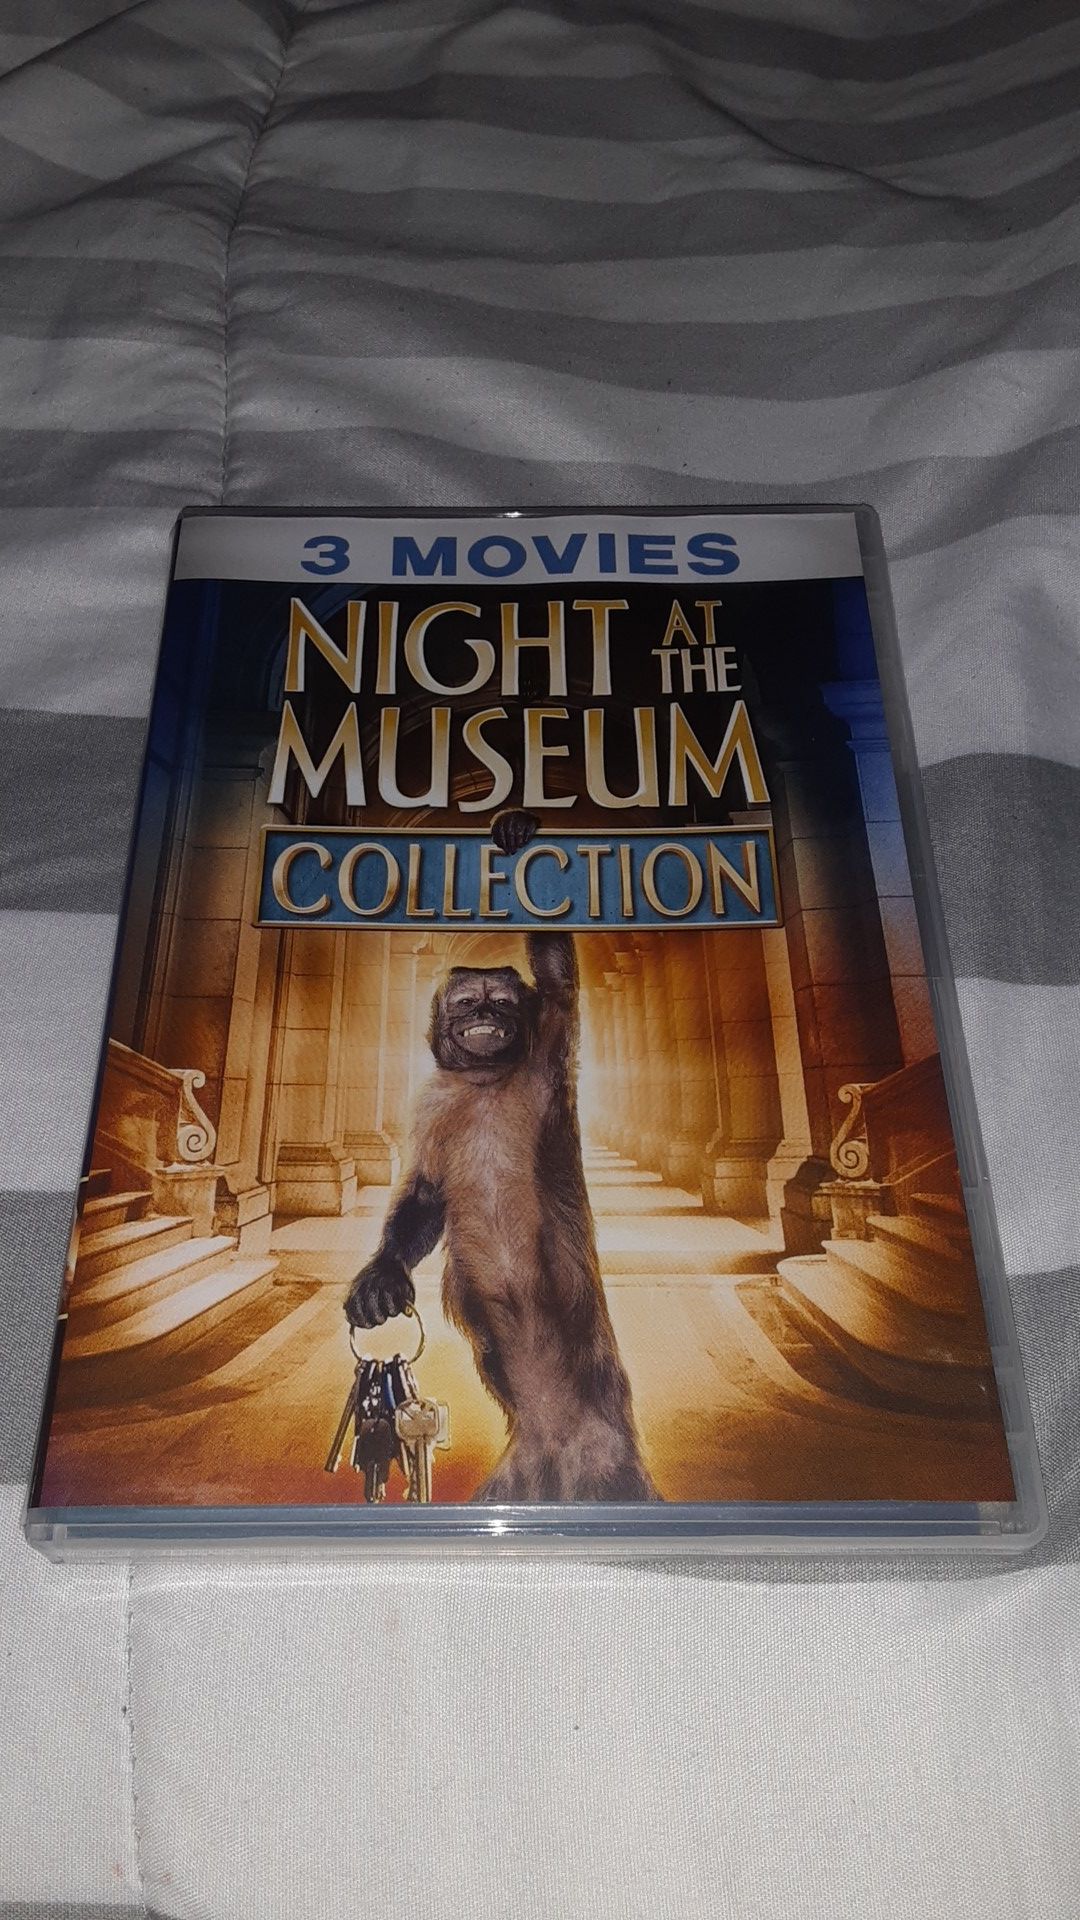 Night at the museum collection